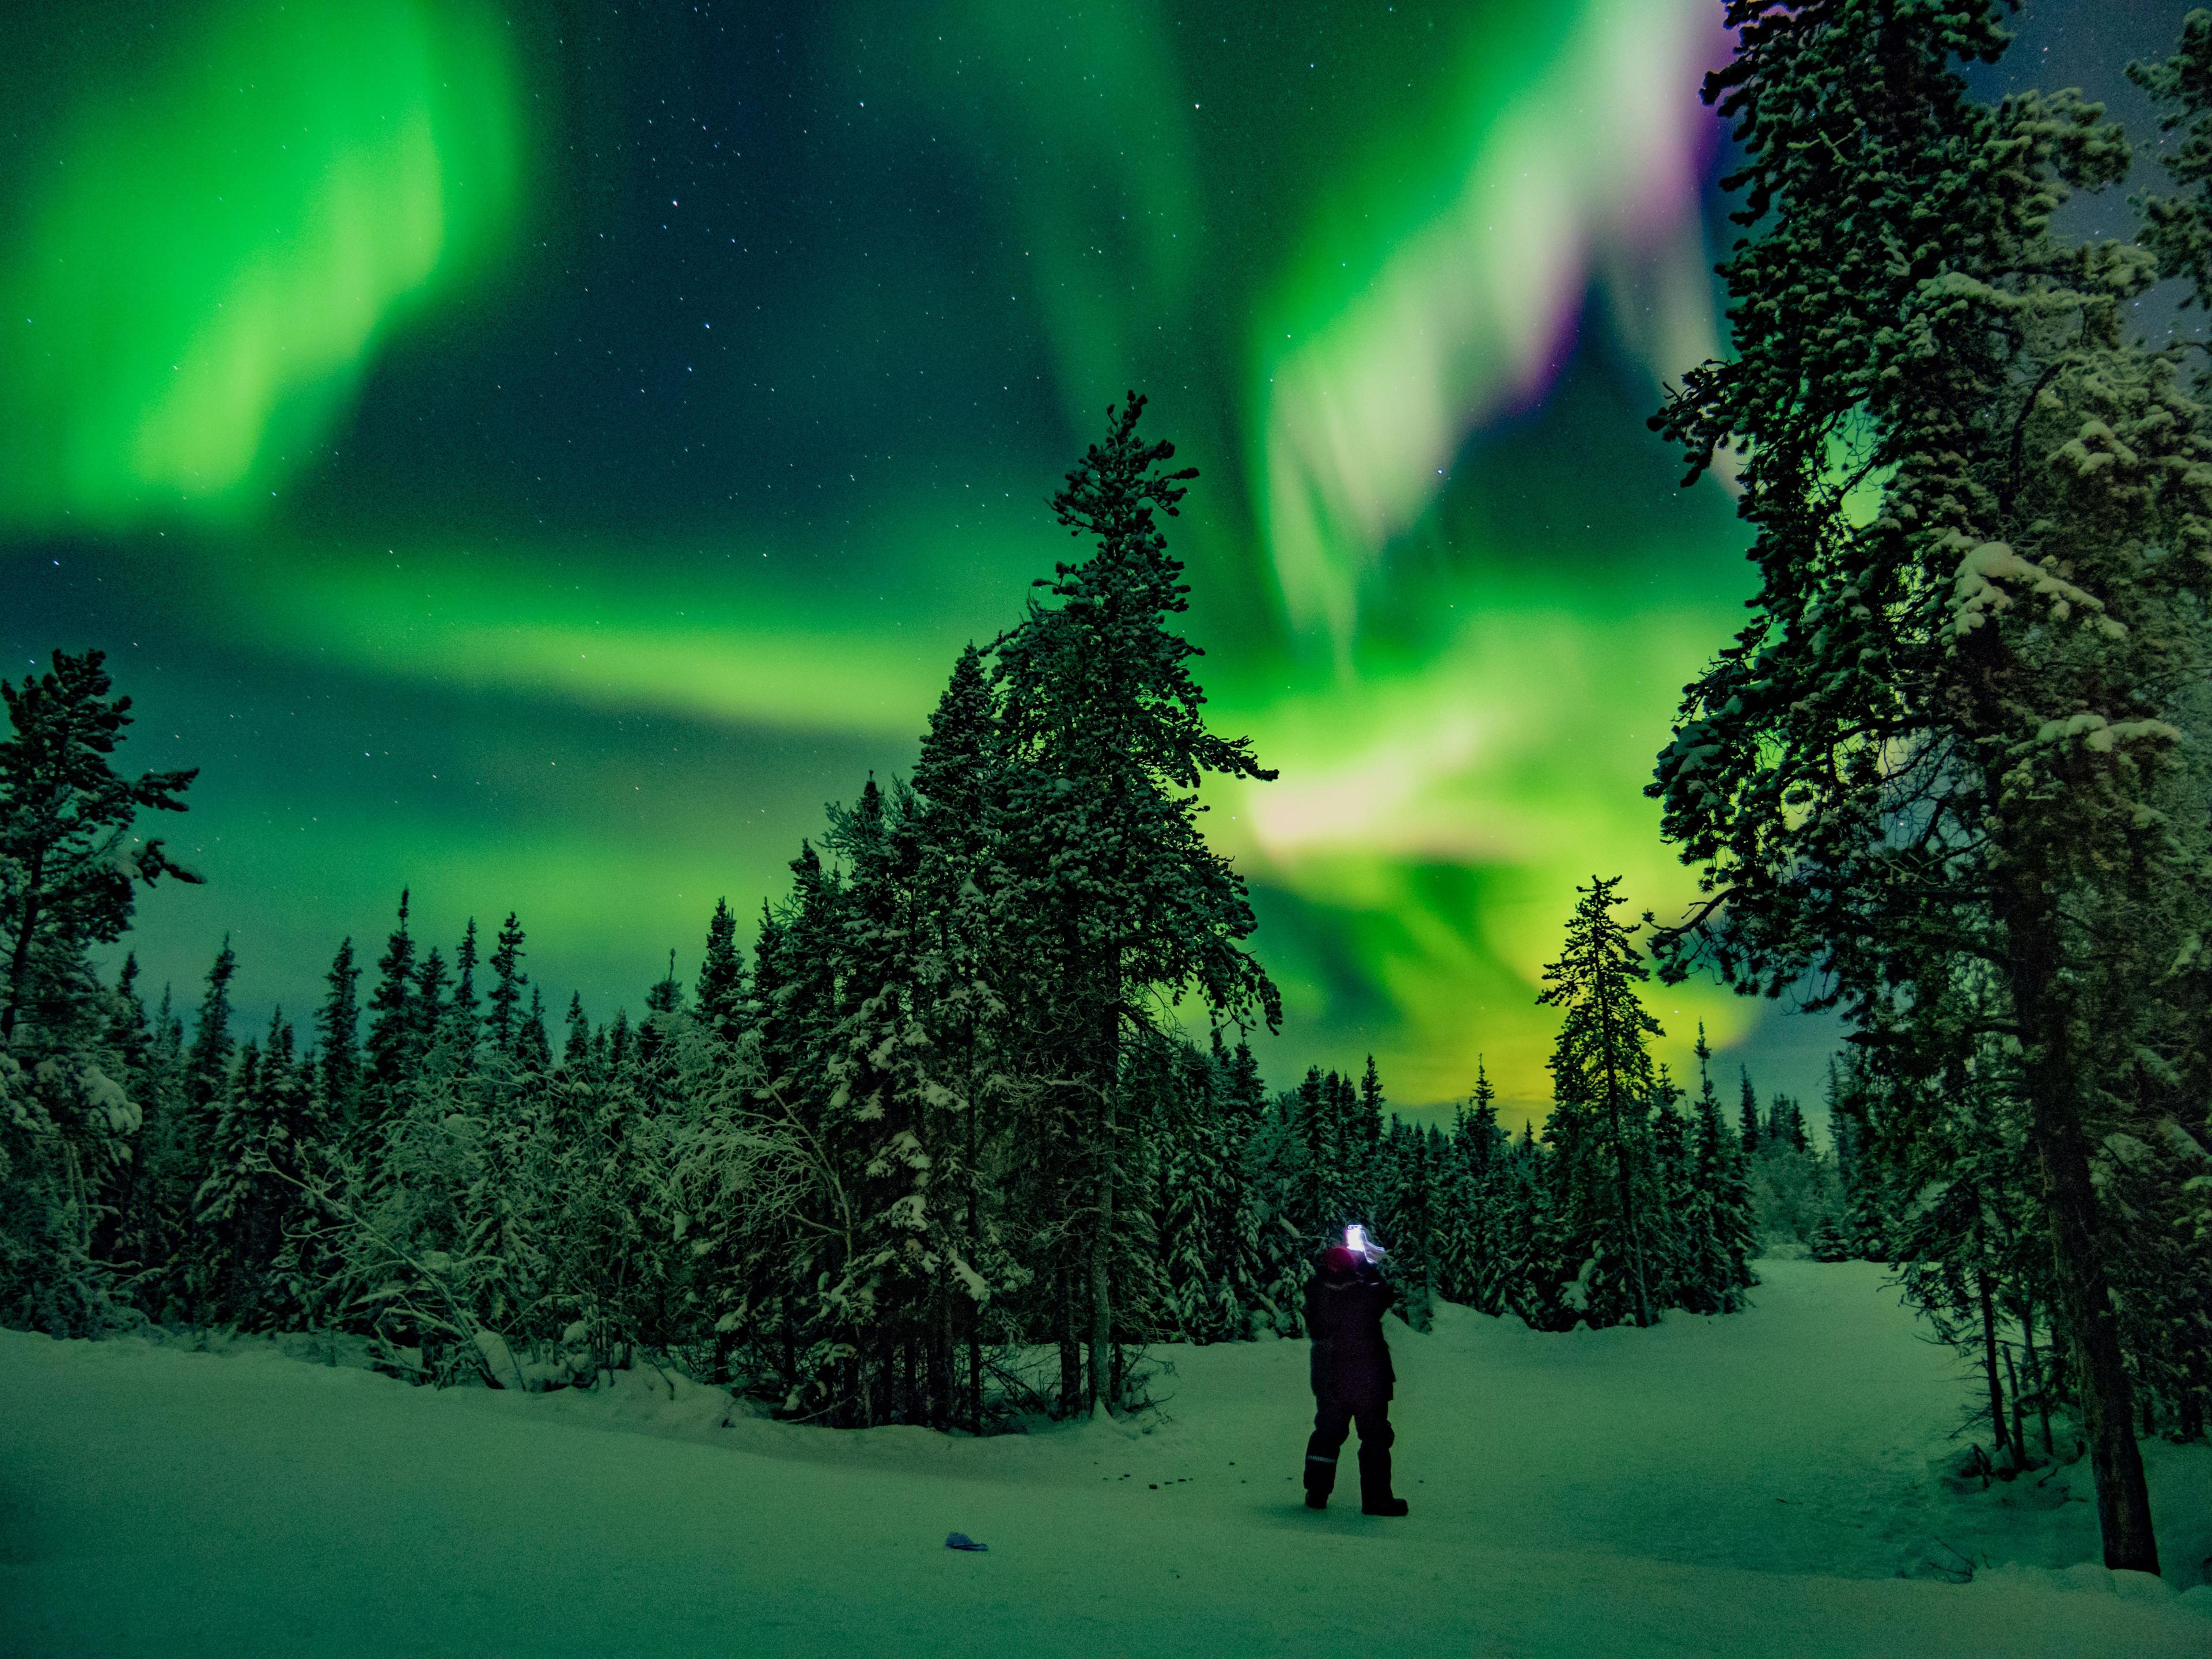 A person stands gazing at the vivid Northern Lights in a snowy forest, with the aurora's green and purple hues illuminating the night sky.